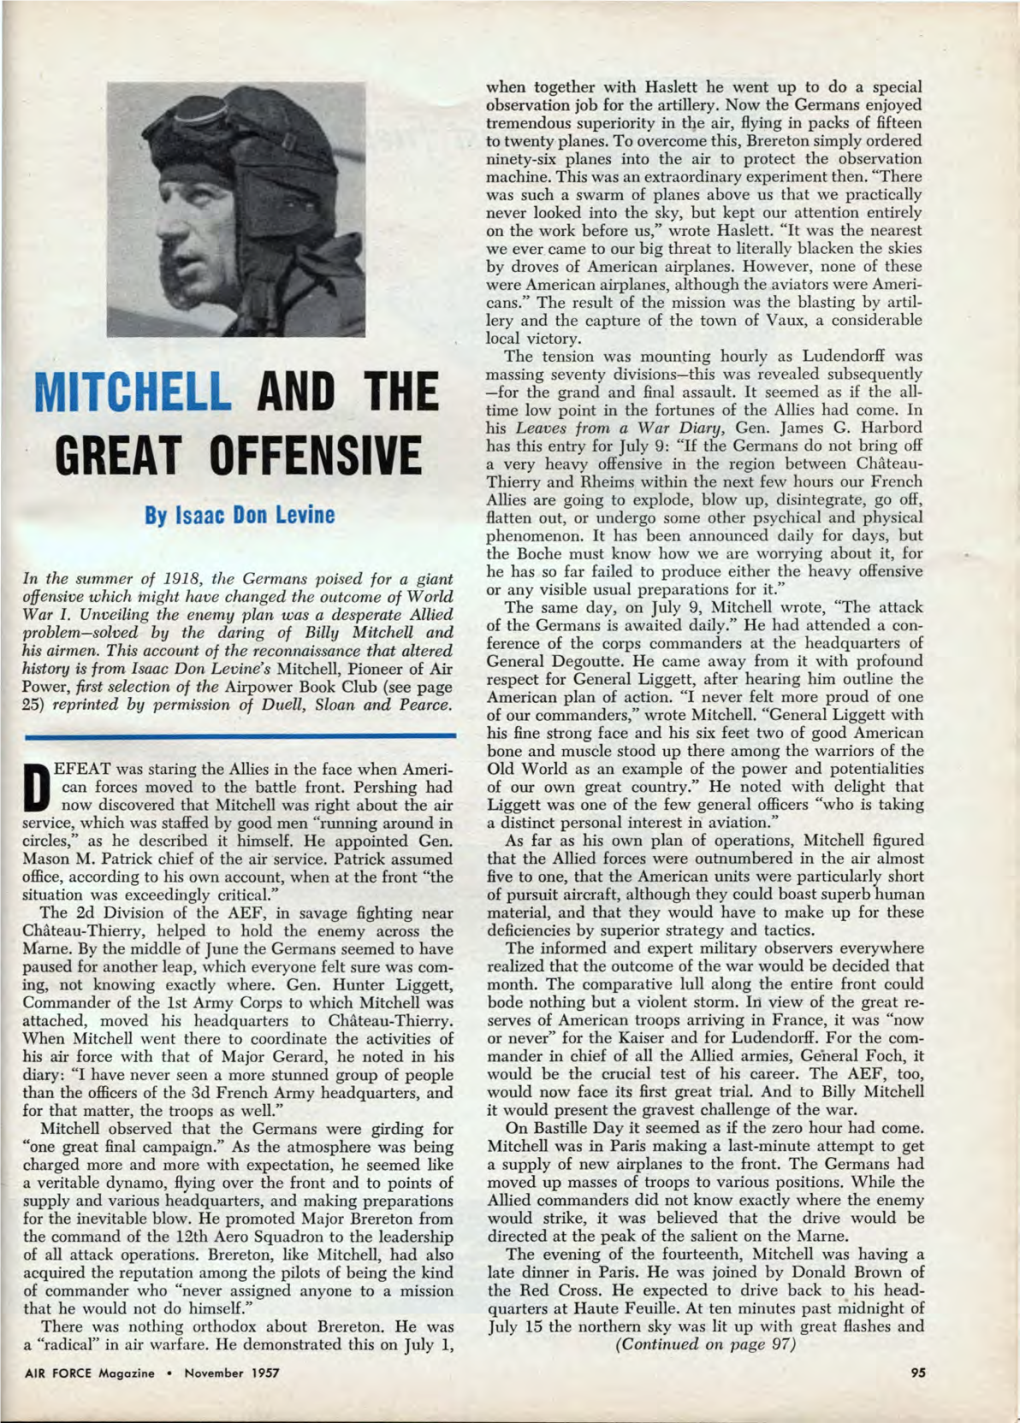 Mitchell and the Great Offensive